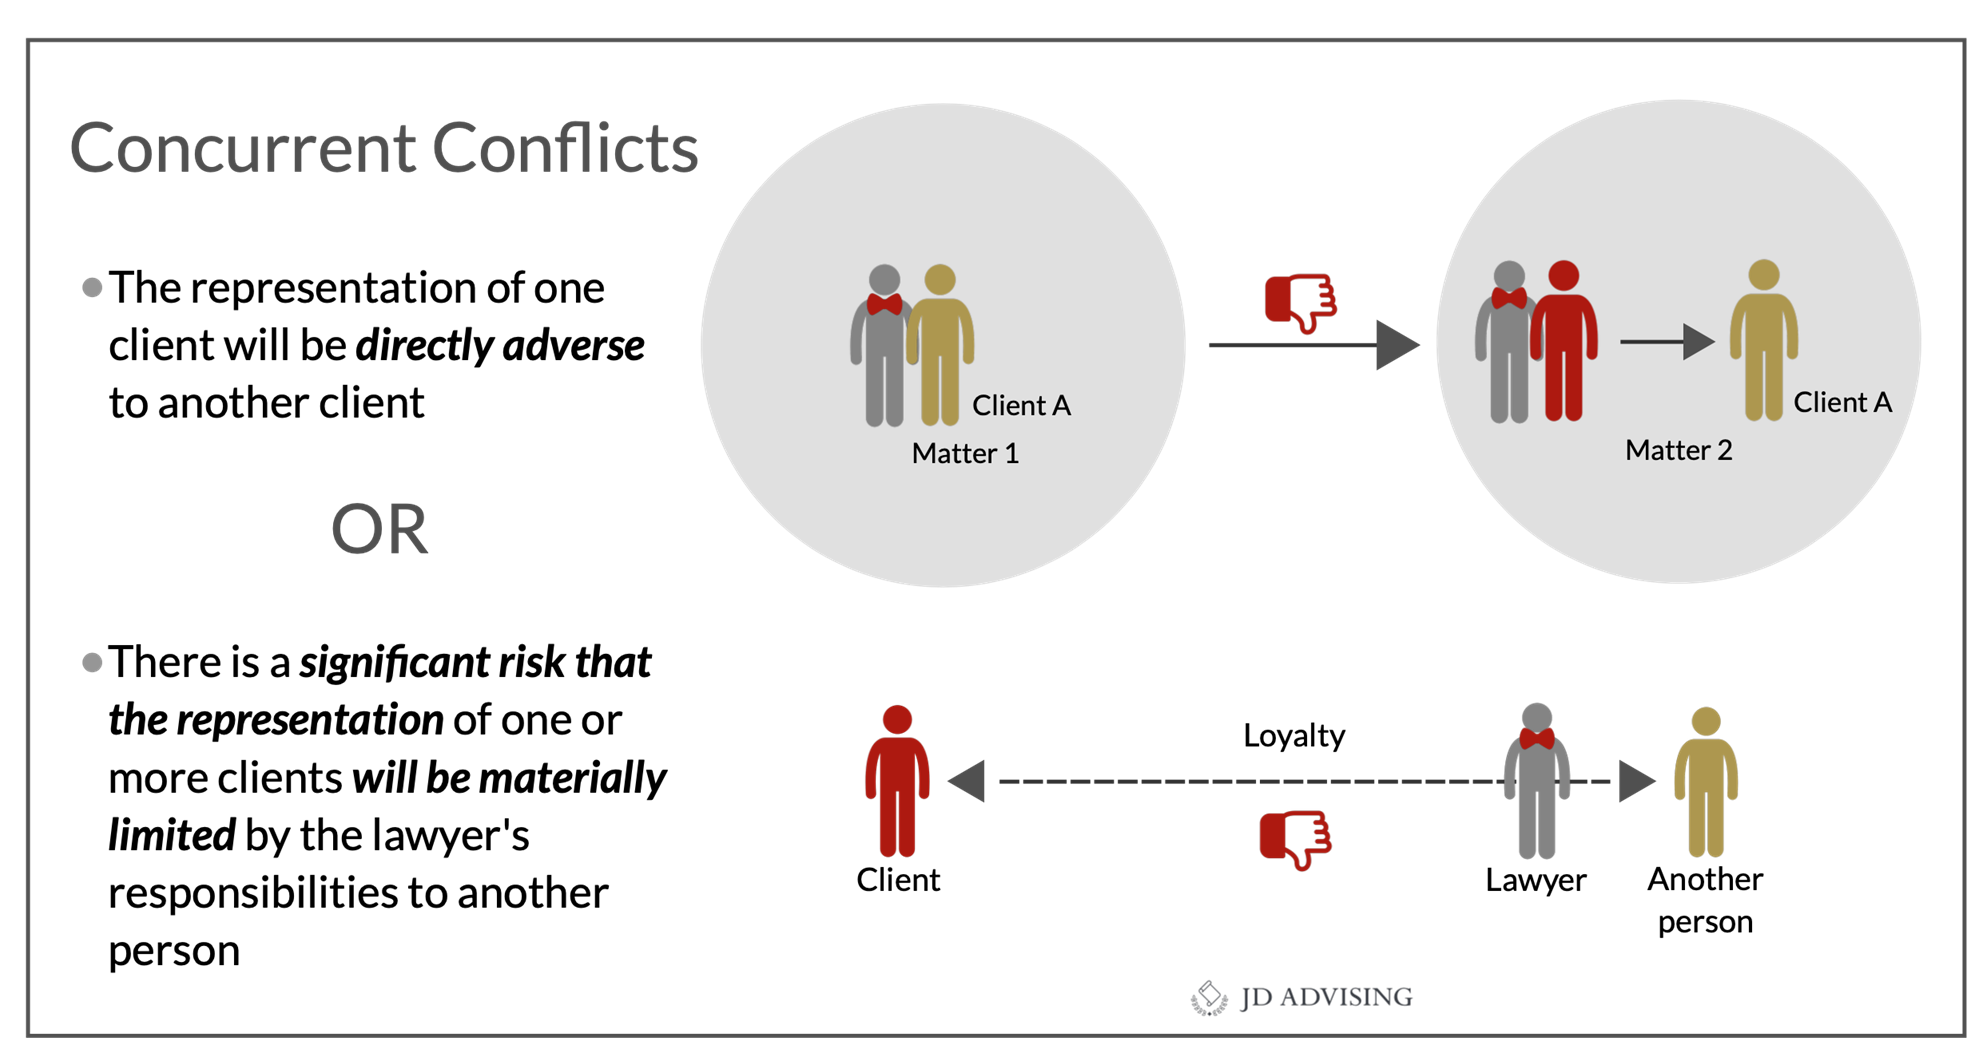 Concurrent Conflicts